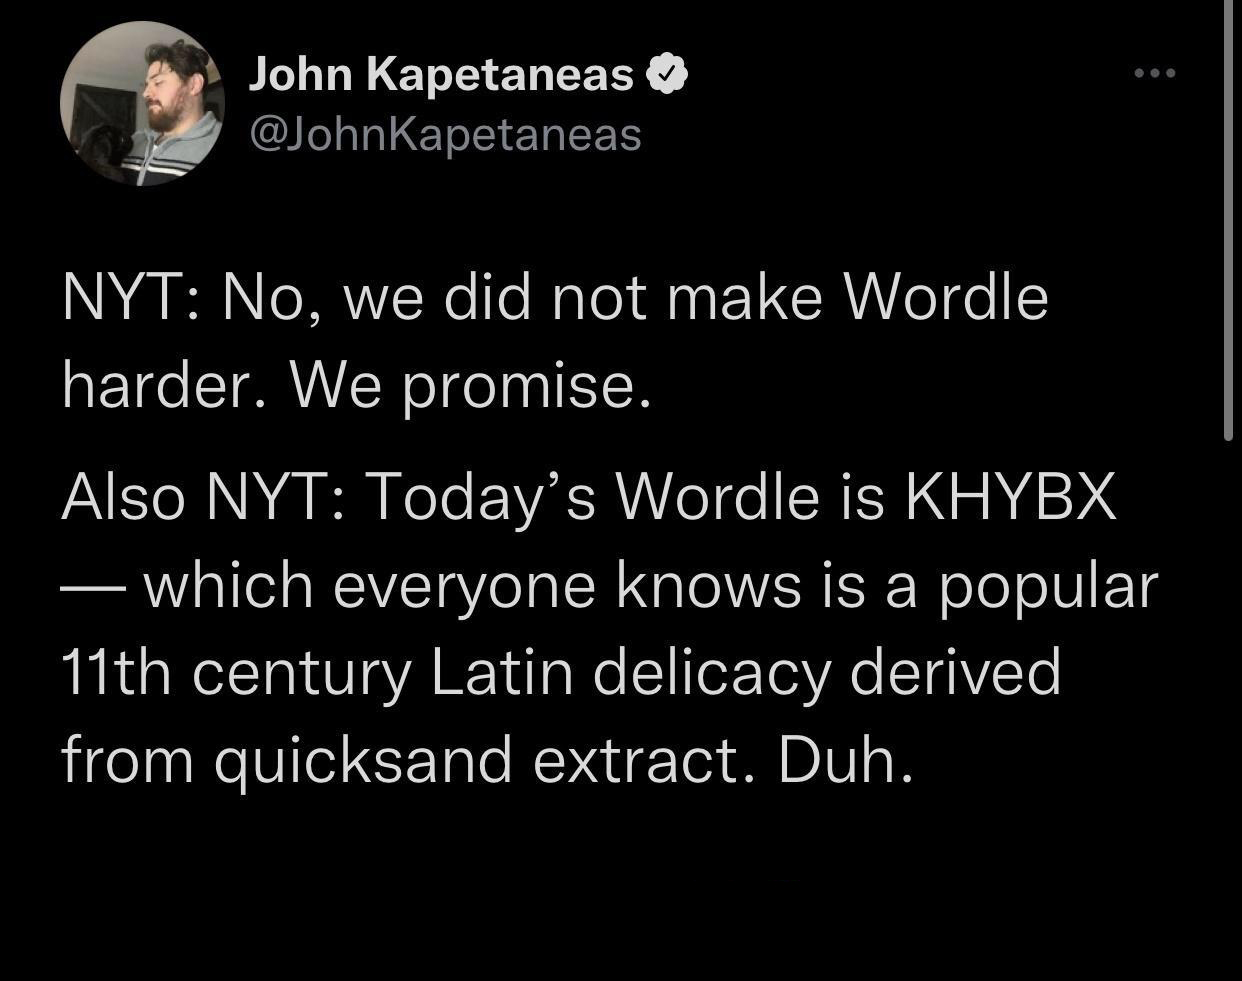 funny memes - dank memes screenshot - John Kapetaneas Nyt No, we did not make Wordle harder. We promise. Also Nyt Today's Wordle is Khybx which everyone knows is a popular 11th century Latin delicacy derived from quicksand extract. Duh.